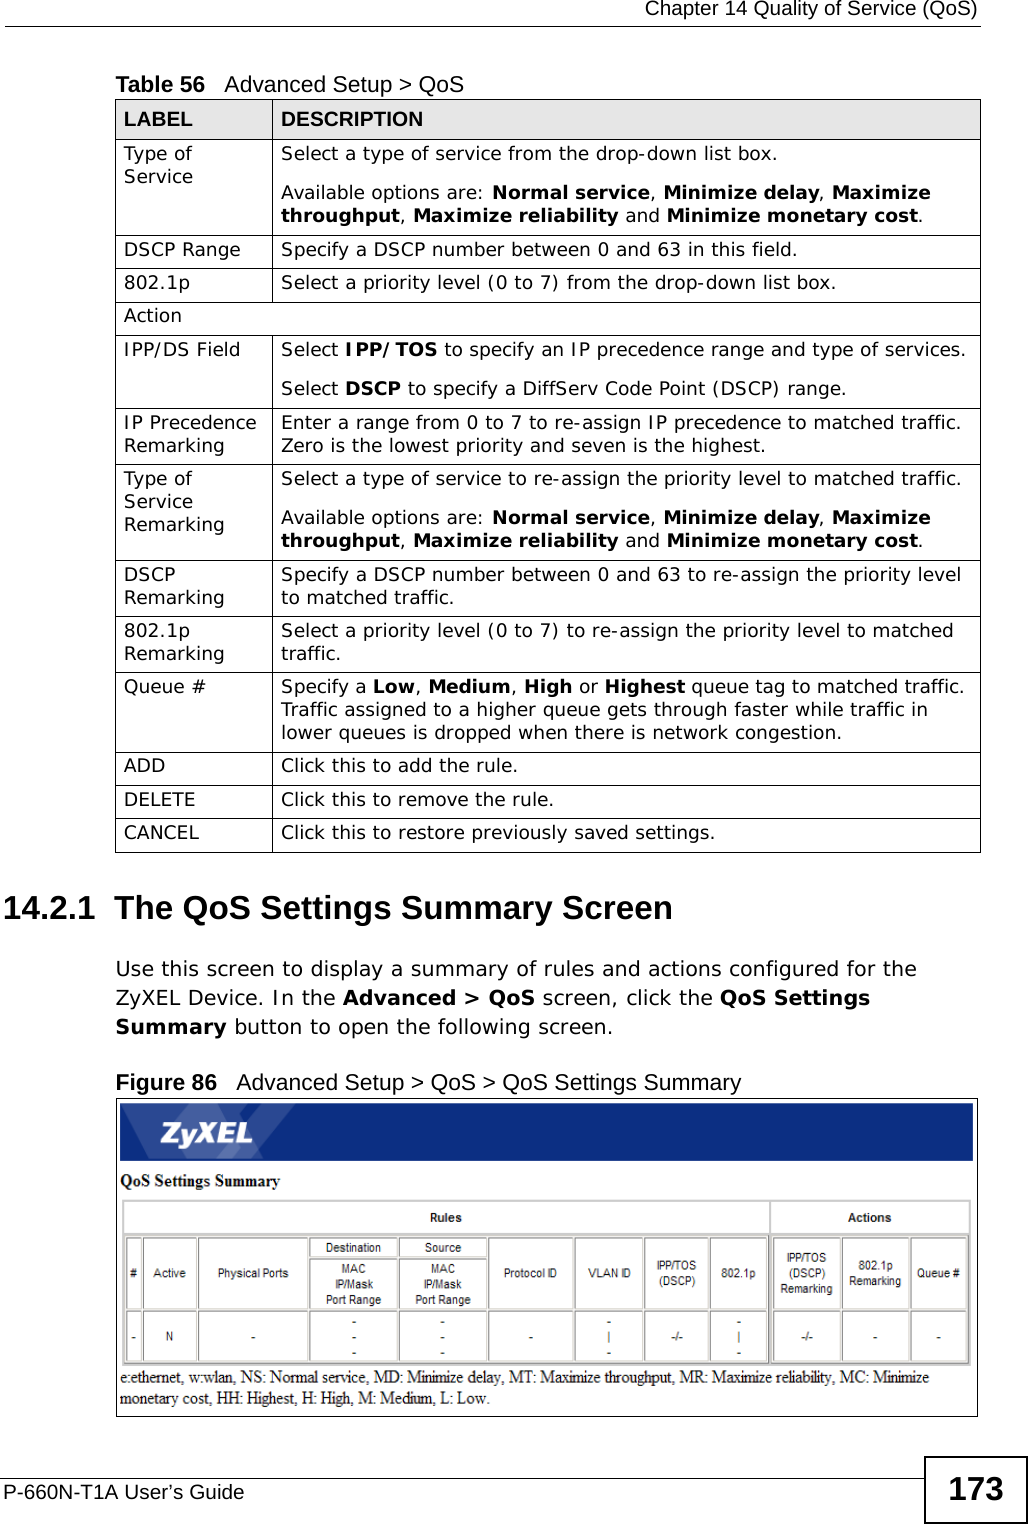  Chapter 14 Quality of Service (QoS)P-660N-T1A User’s Guide 17314.2.1  The QoS Settings Summary Screen Use this screen to display a summary of rules and actions configured for the ZyXEL Device. In the Advanced &gt; QoS screen, click the QoS Settings Summary button to open the following screen.Figure 86   Advanced Setup &gt; QoS &gt; QoS Settings SummaryType of Service Select a type of service from the drop-down list box.Available options are: Normal service, Minimize delay, Maximize throughput, Maximize reliability and Minimize monetary cost.DSCP Range Specify a DSCP number between 0 and 63 in this field.802.1p Select a priority level (0 to 7) from the drop-down list box.ActionIPP/DS Field Select IPP/TOS to specify an IP precedence range and type of services.Select DSCP to specify a DiffServ Code Point (DSCP) range.IP Precedence Remarking Enter a range from 0 to 7 to re-assign IP precedence to matched traffic. Zero is the lowest priority and seven is the highest.Type of Service RemarkingSelect a type of service to re-assign the priority level to matched traffic.Available options are: Normal service, Minimize delay, Maximize throughput, Maximize reliability and Minimize monetary cost.DSCP Remarking Specify a DSCP number between 0 and 63 to re-assign the priority level to matched traffic.802.1p Remarking Select a priority level (0 to 7) to re-assign the priority level to matched traffic.Queue # Specify a Low, Medium, High or Highest queue tag to matched traffic. Traffic assigned to a higher queue gets through faster while traffic in lower queues is dropped when there is network congestion.ADD Click this to add the rule.DELETE Click this to remove the rule.CANCEL Click this to restore previously saved settings.Table 56   Advanced Setup &gt; QoSLABEL DESCRIPTION